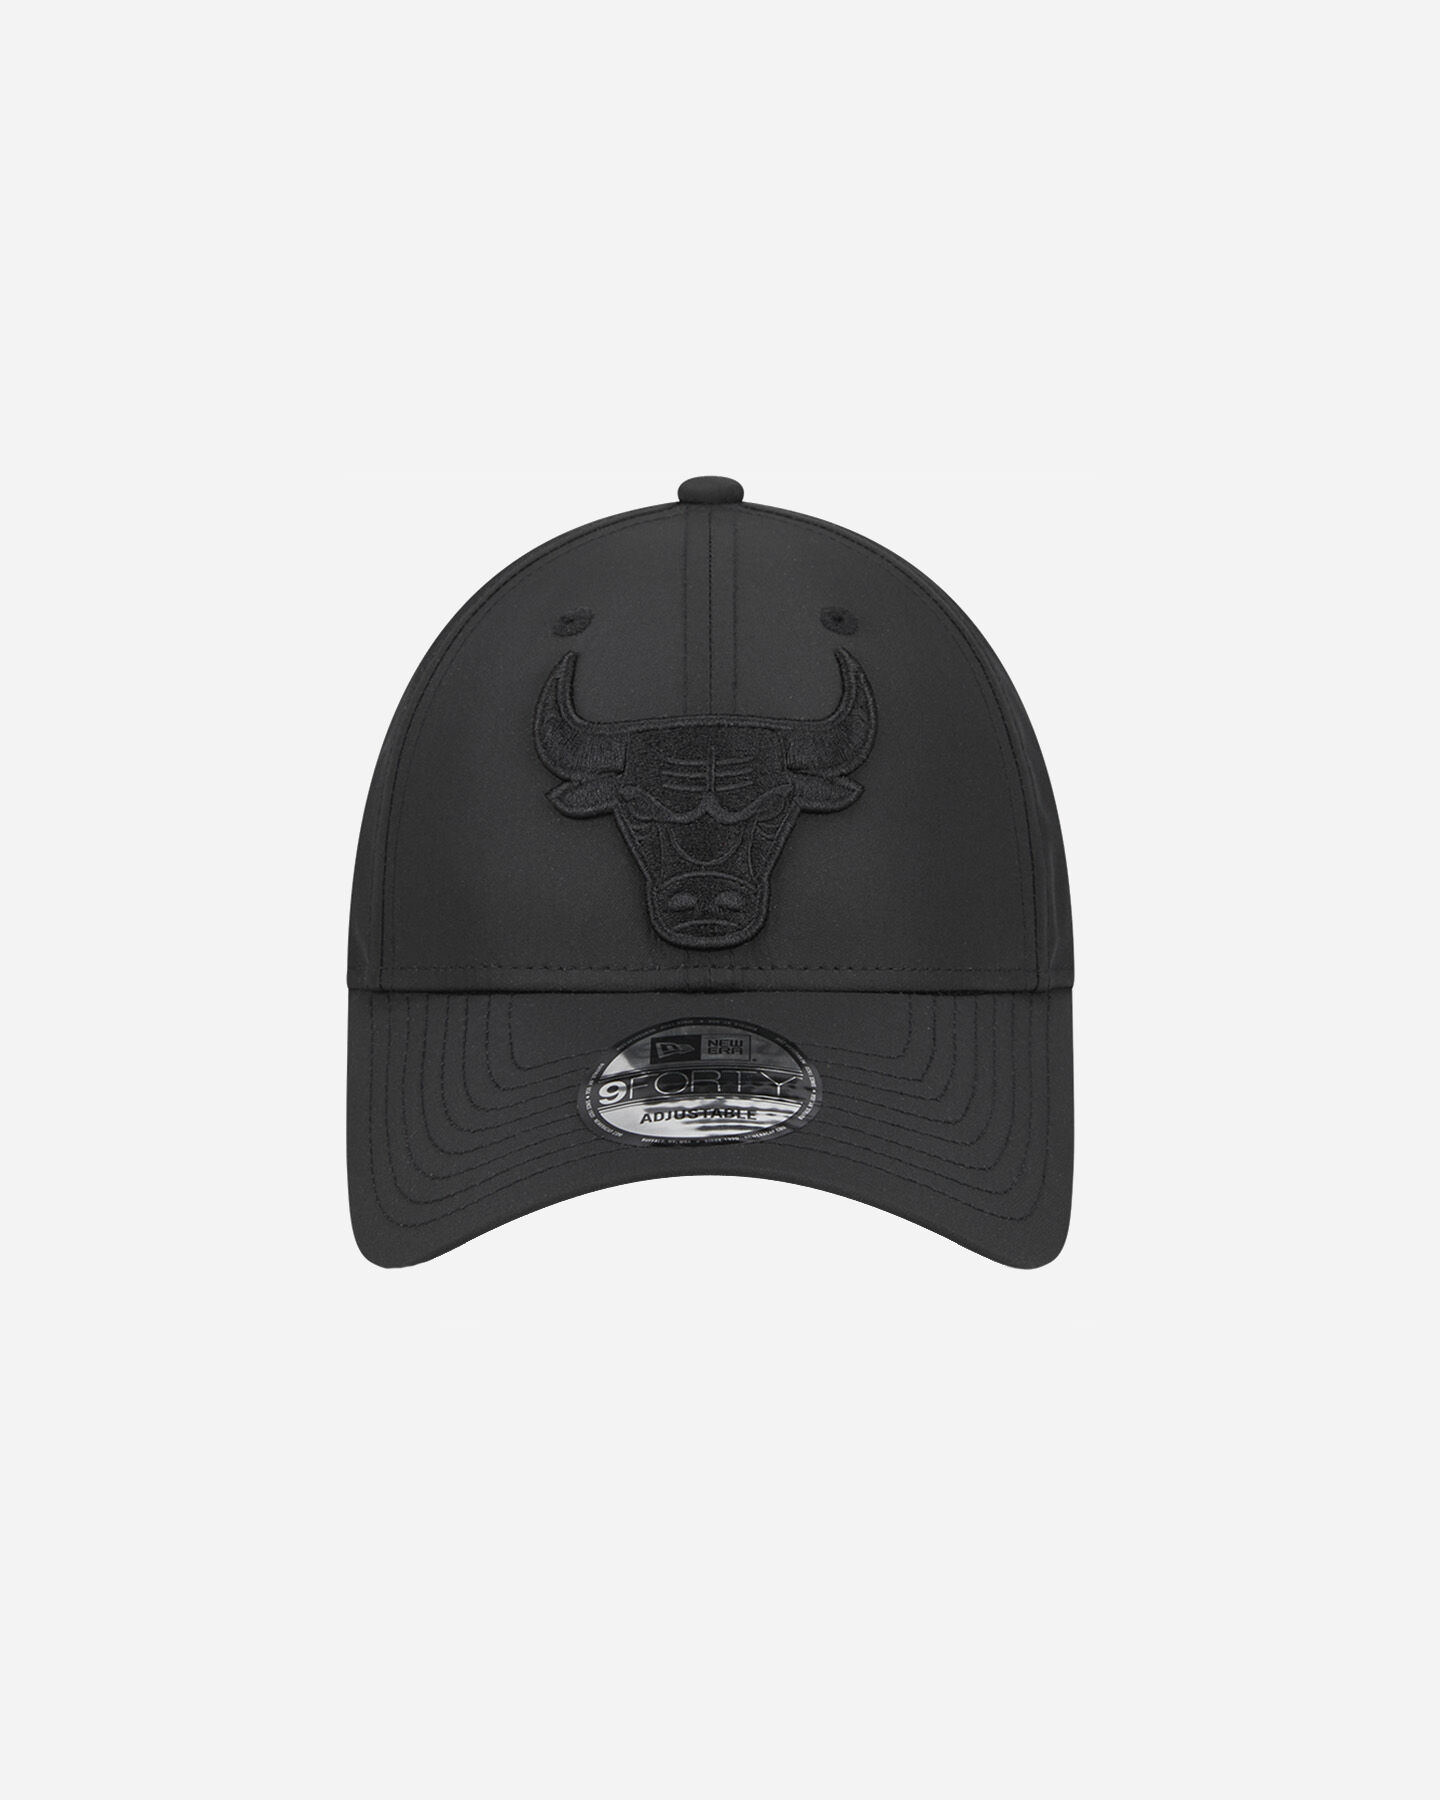  Cappellino NEW ERA 9FORTY GAME PLAY CHICAGO BULLS  S5631002|001|OSFM scatto 1